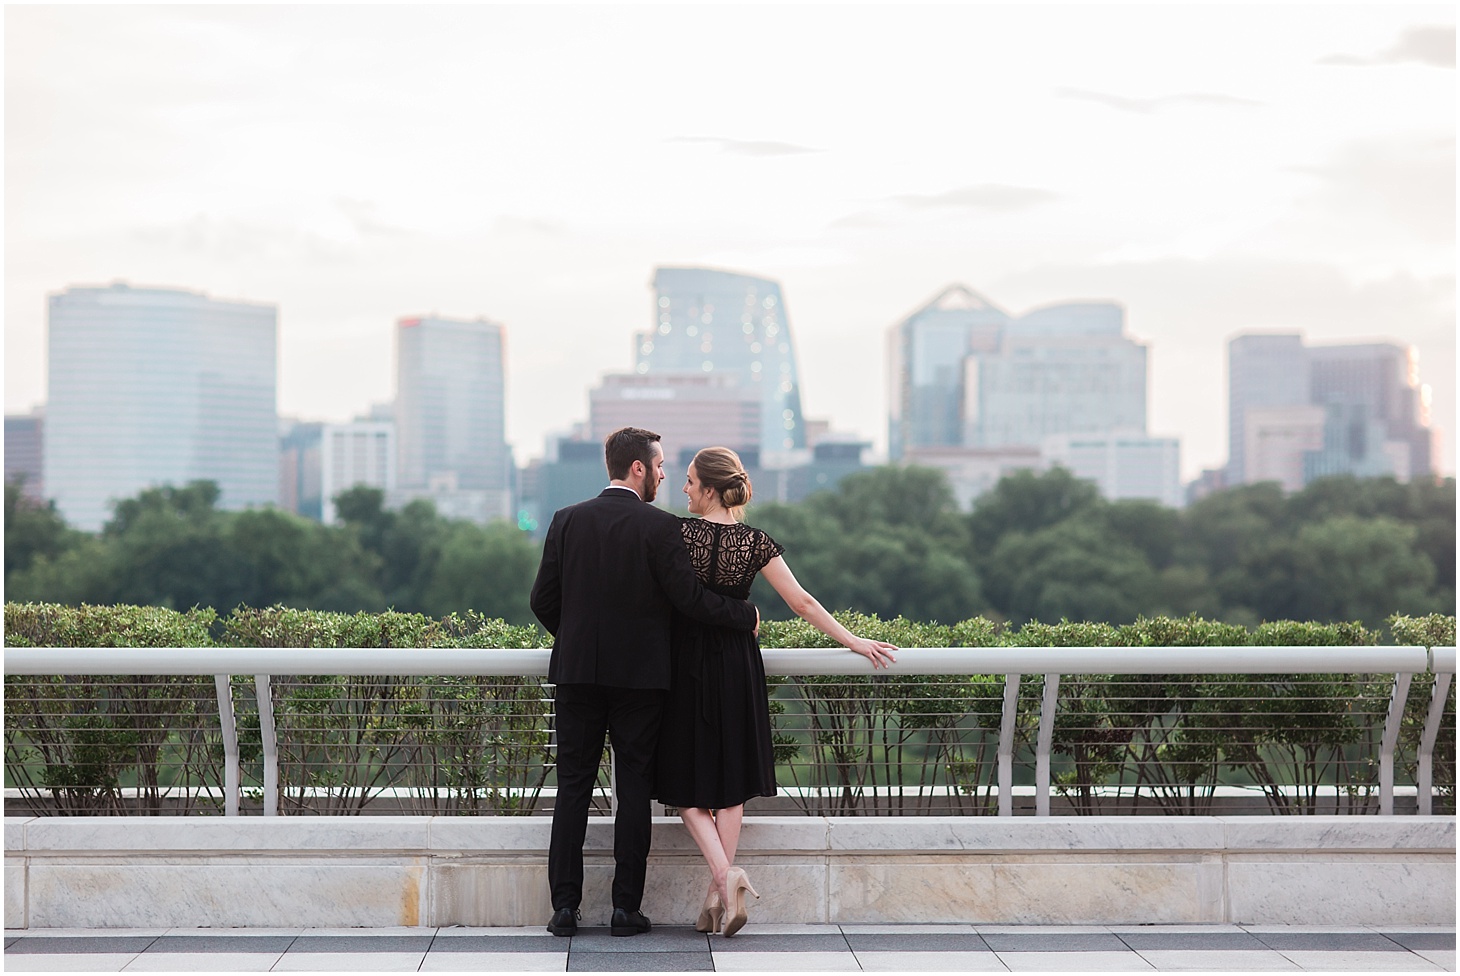 Formal Engagement Portraits Overlooking DC, Black Tie Evening Engagement Session at Kennedy Center and Memorial Bridge, Sarah Bradshaw Photography